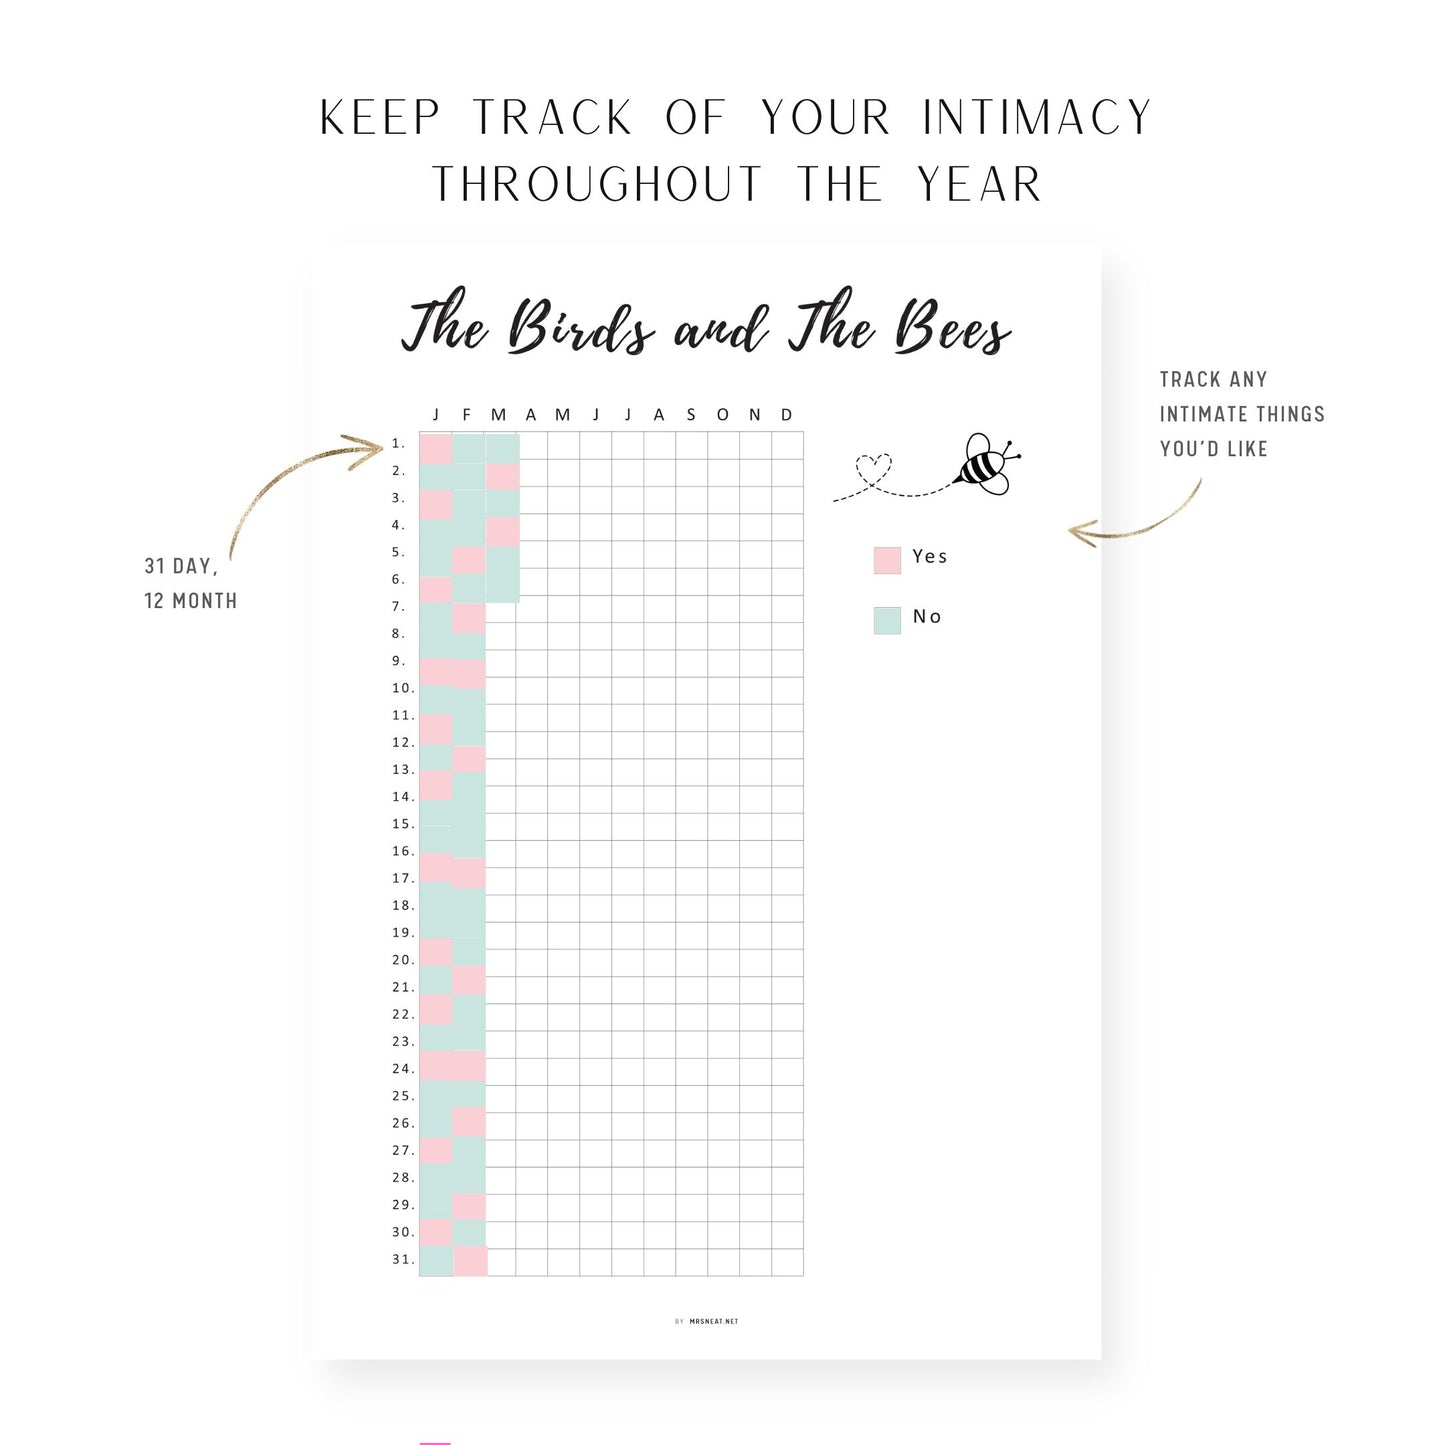 Intimacy Tracker Template Printable, Sex Tracker, Intimacy Tracker, The Birds and The Bees Tracker Template, Sexual Health Tracker, Love Tracker, PDF, A4, A5, Letter, Half Letter, 2 versions